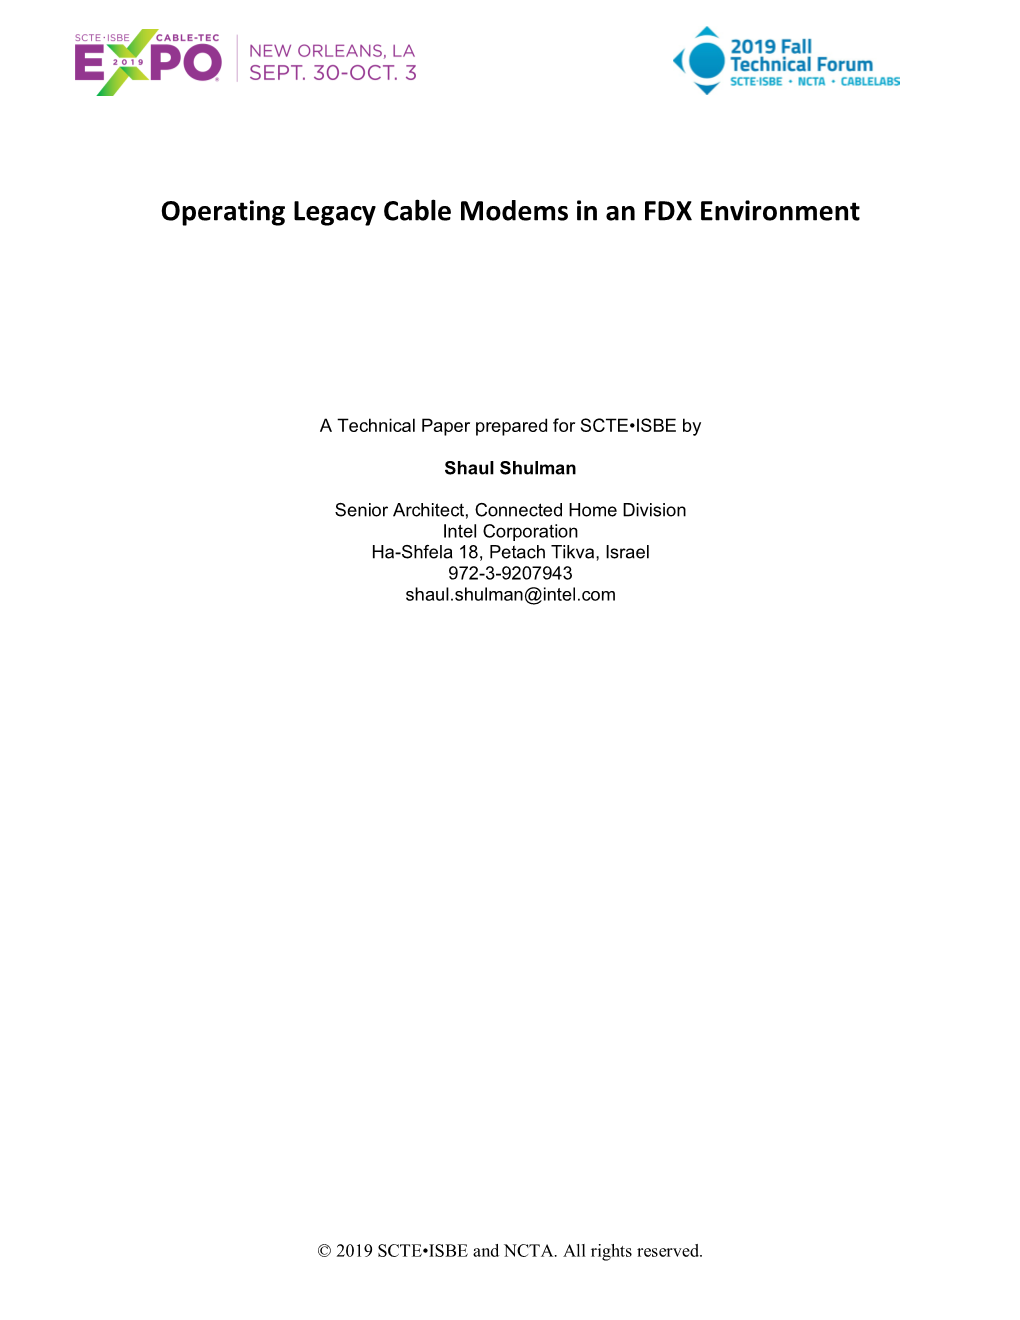 Operating Legacy Cable Modems in an FDX Environment